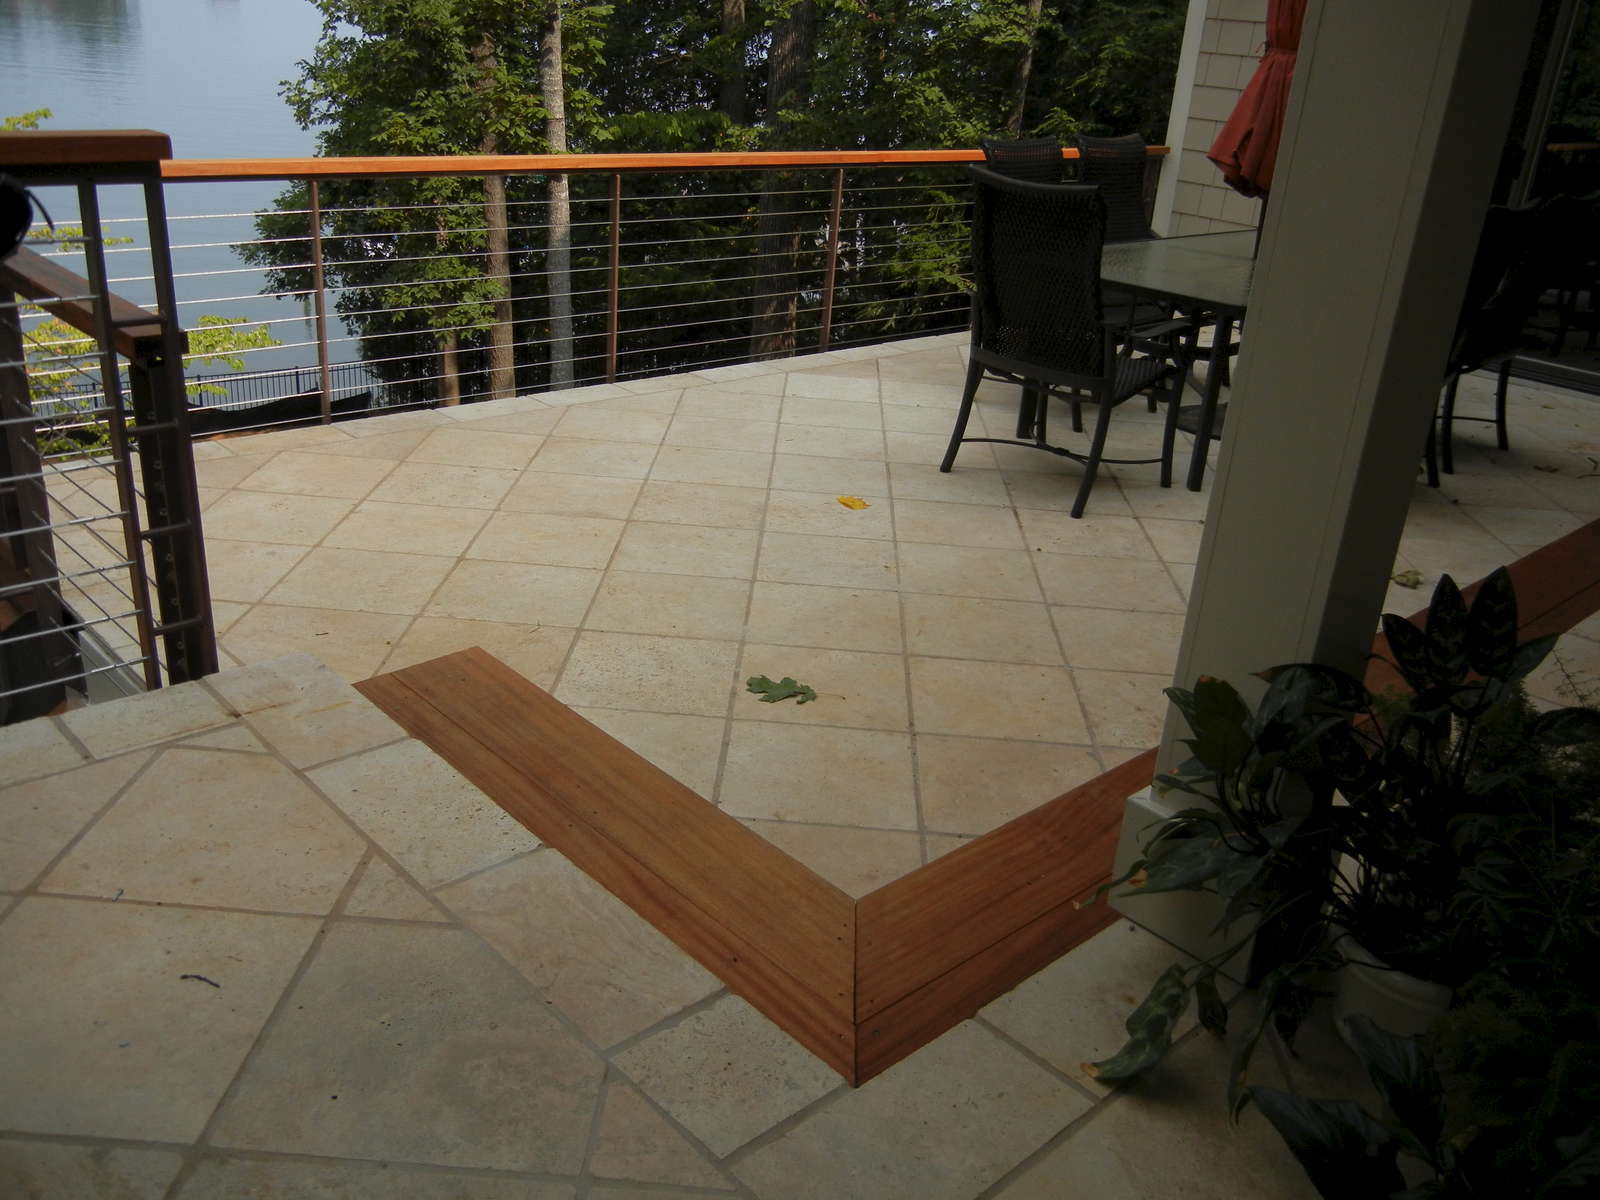 The project includes an urban outdoor living space that includes a sunken Travertine patio with cable rail. The railing helps open up the view and is asethetically appealing.